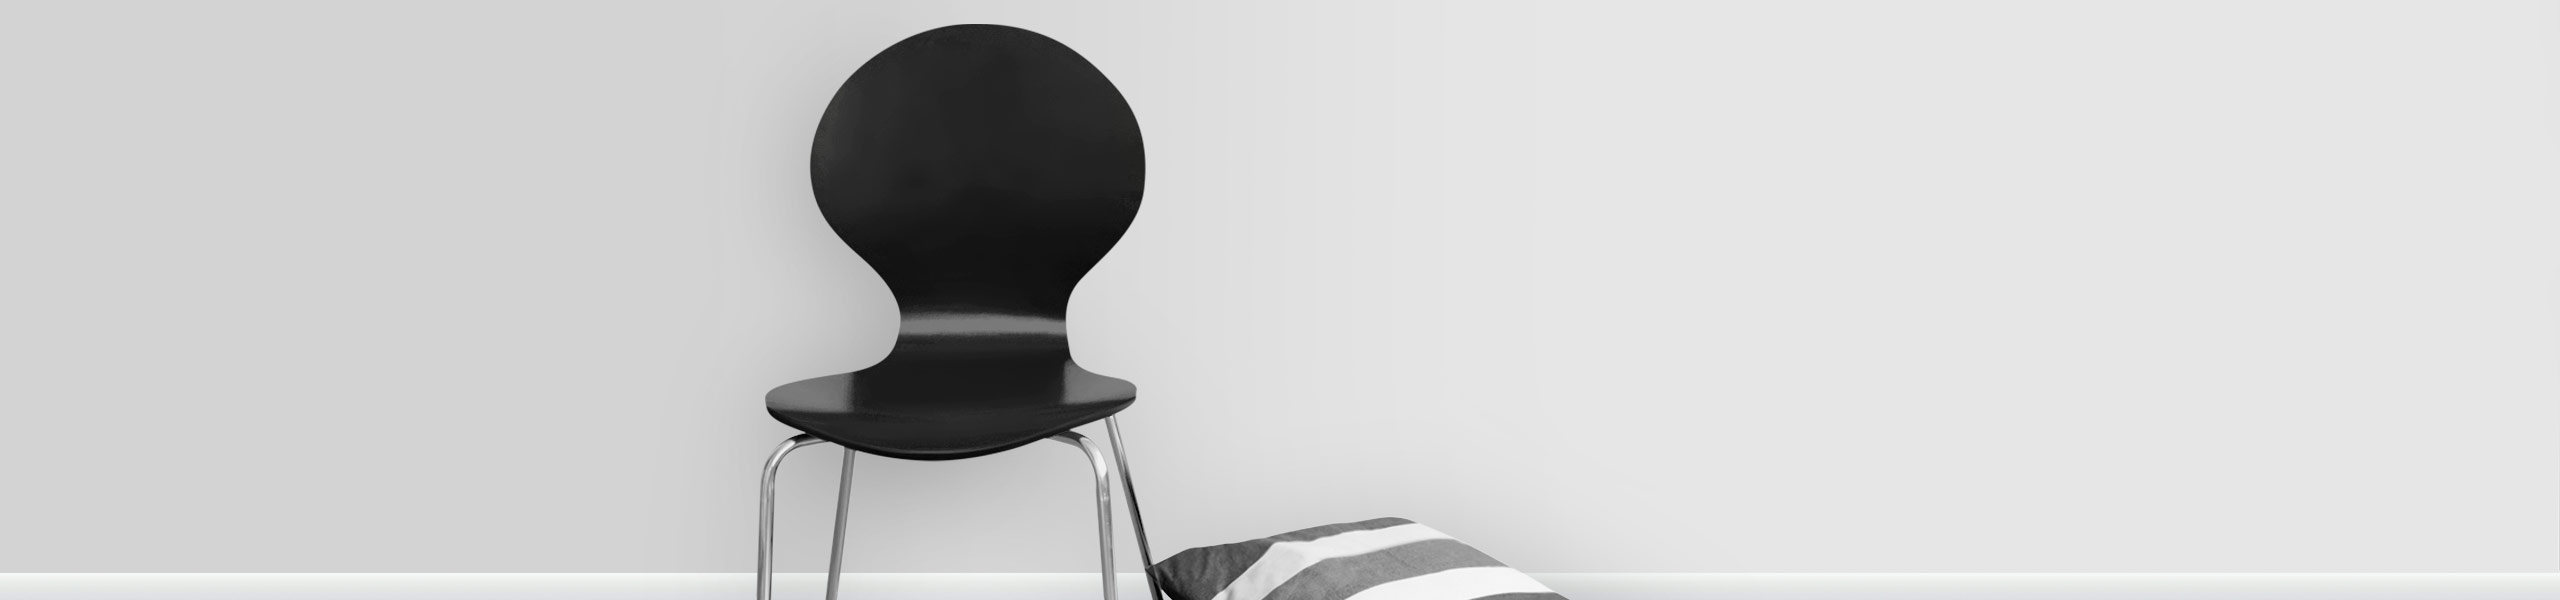 Candy Chair Black Video Banner